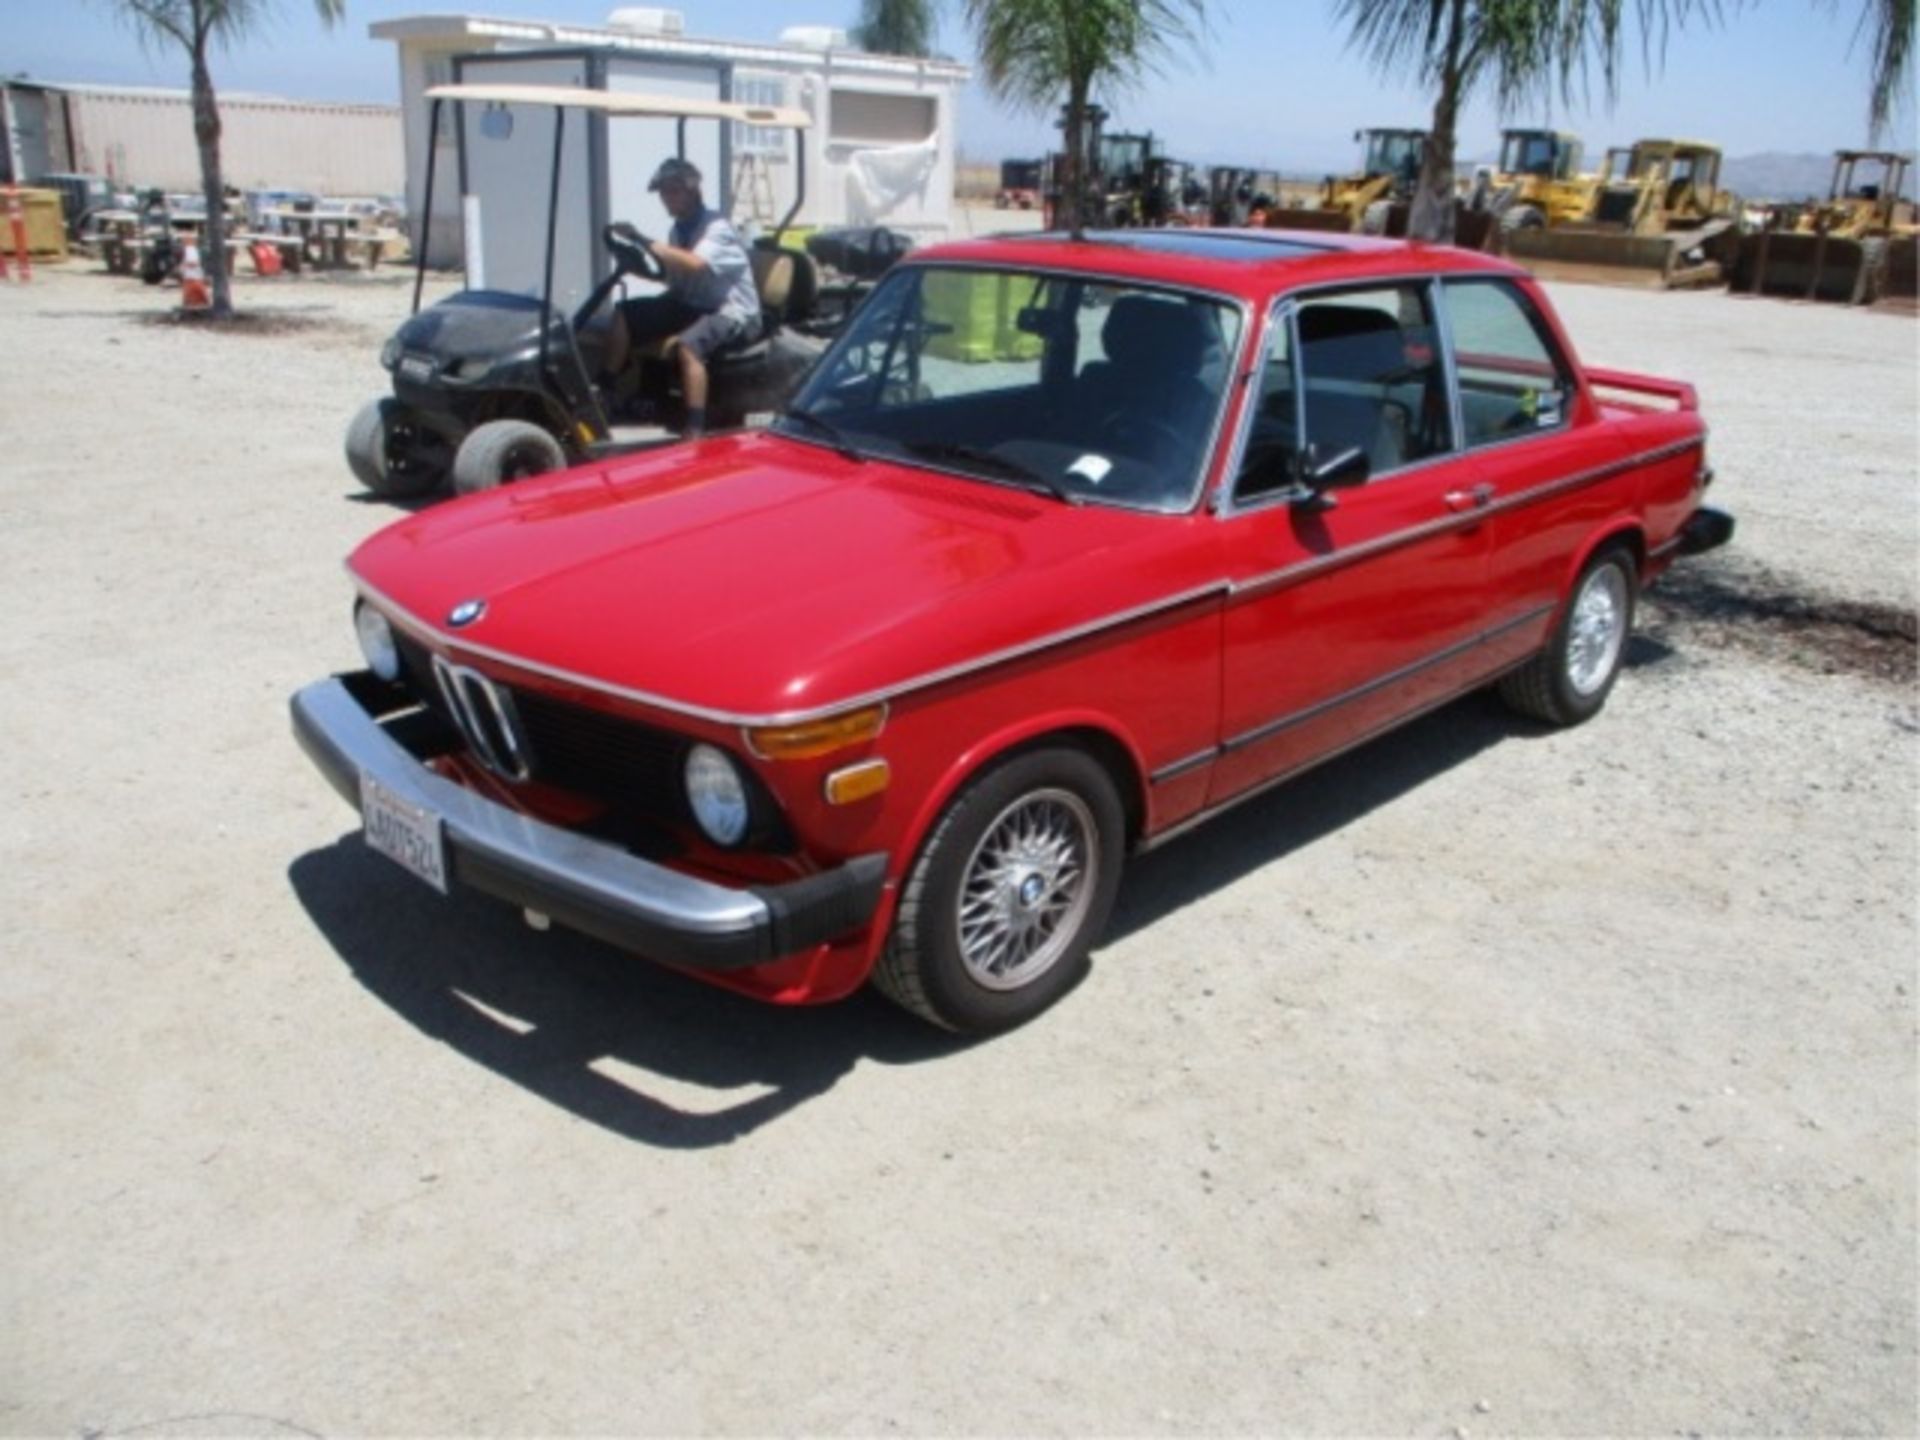 1972 BMW 2002ti Coupe, M10 4-Cyl Gas, 4-Speed Manual, S/N: 2761619, Mile/Hours - 49518 - Image 3 of 79